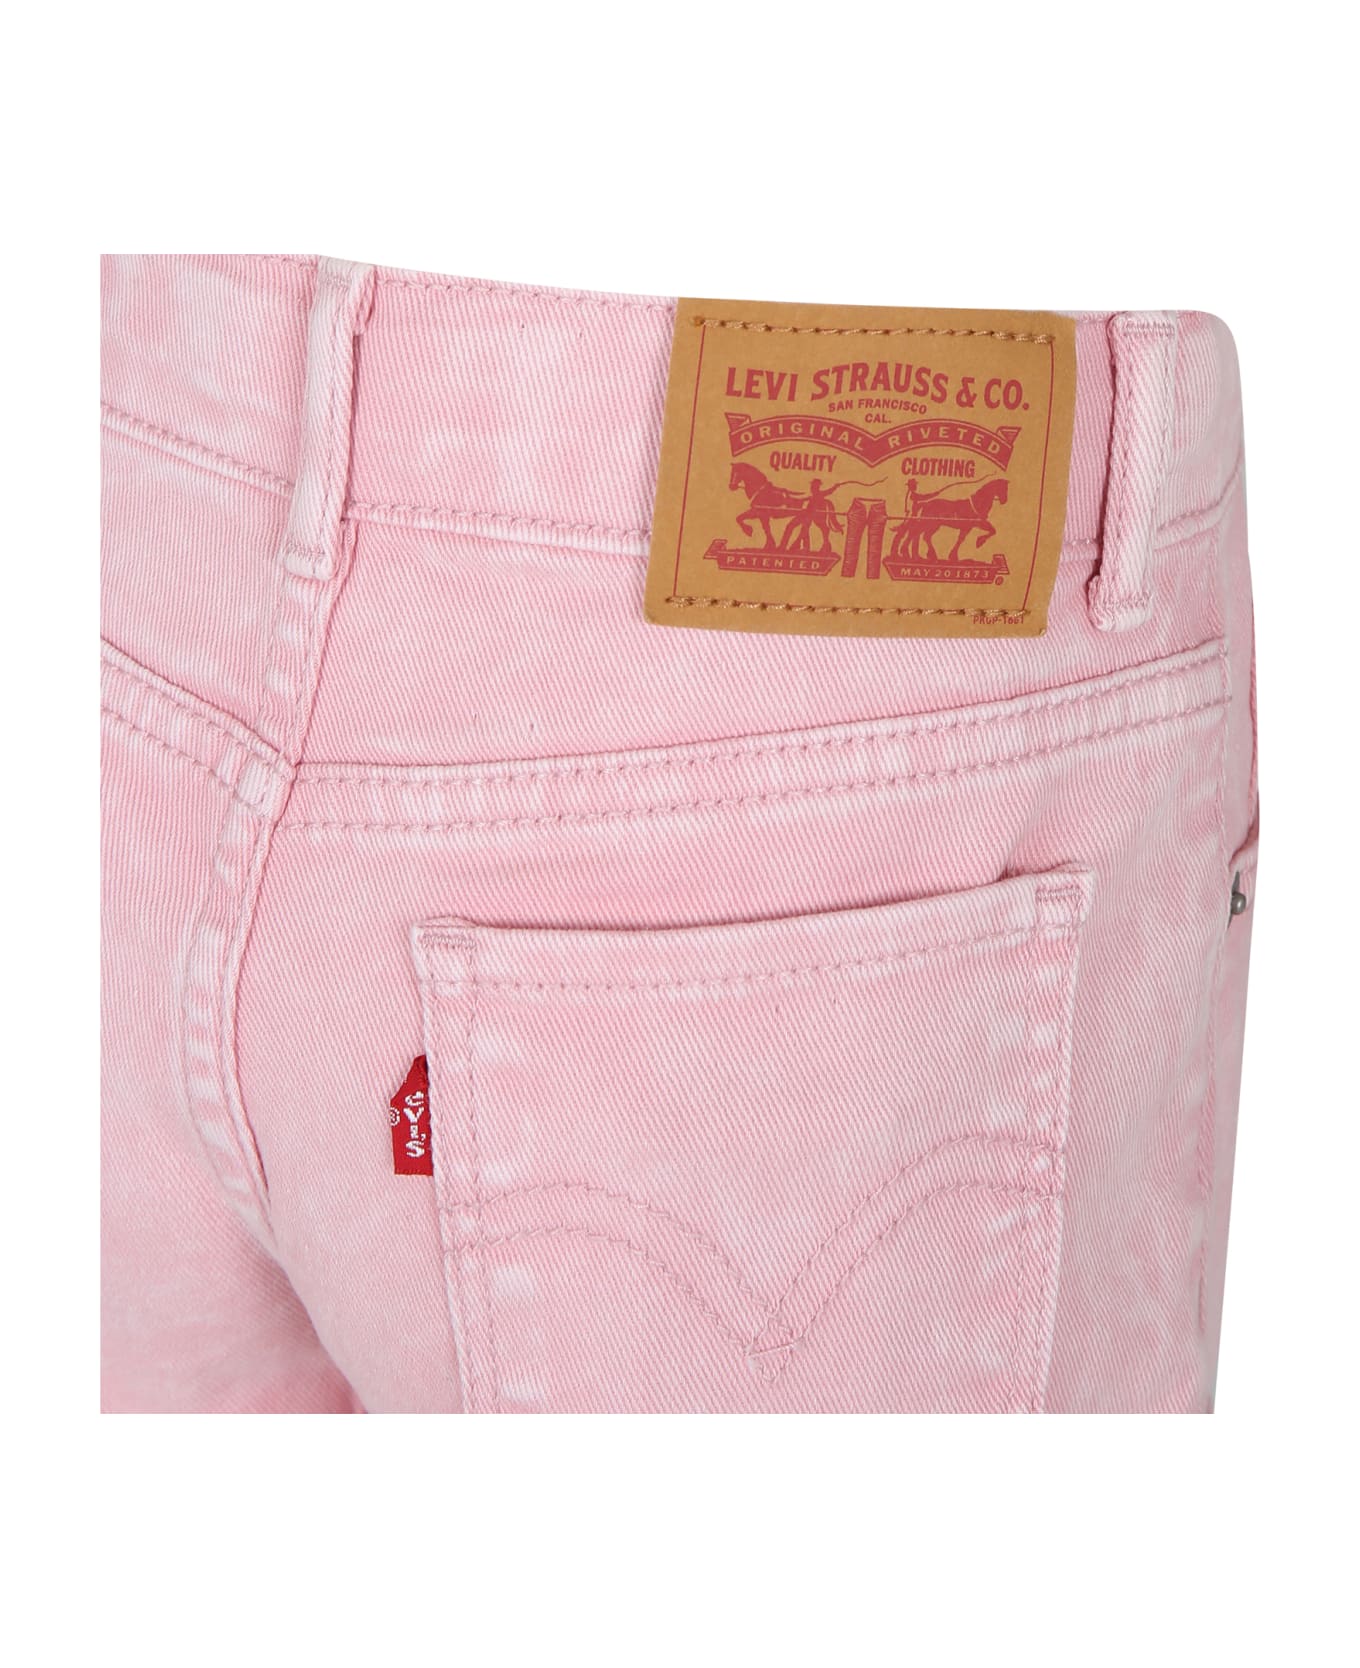 Levi's Pink Shorts For Girl With Logo - Pink ボトムス